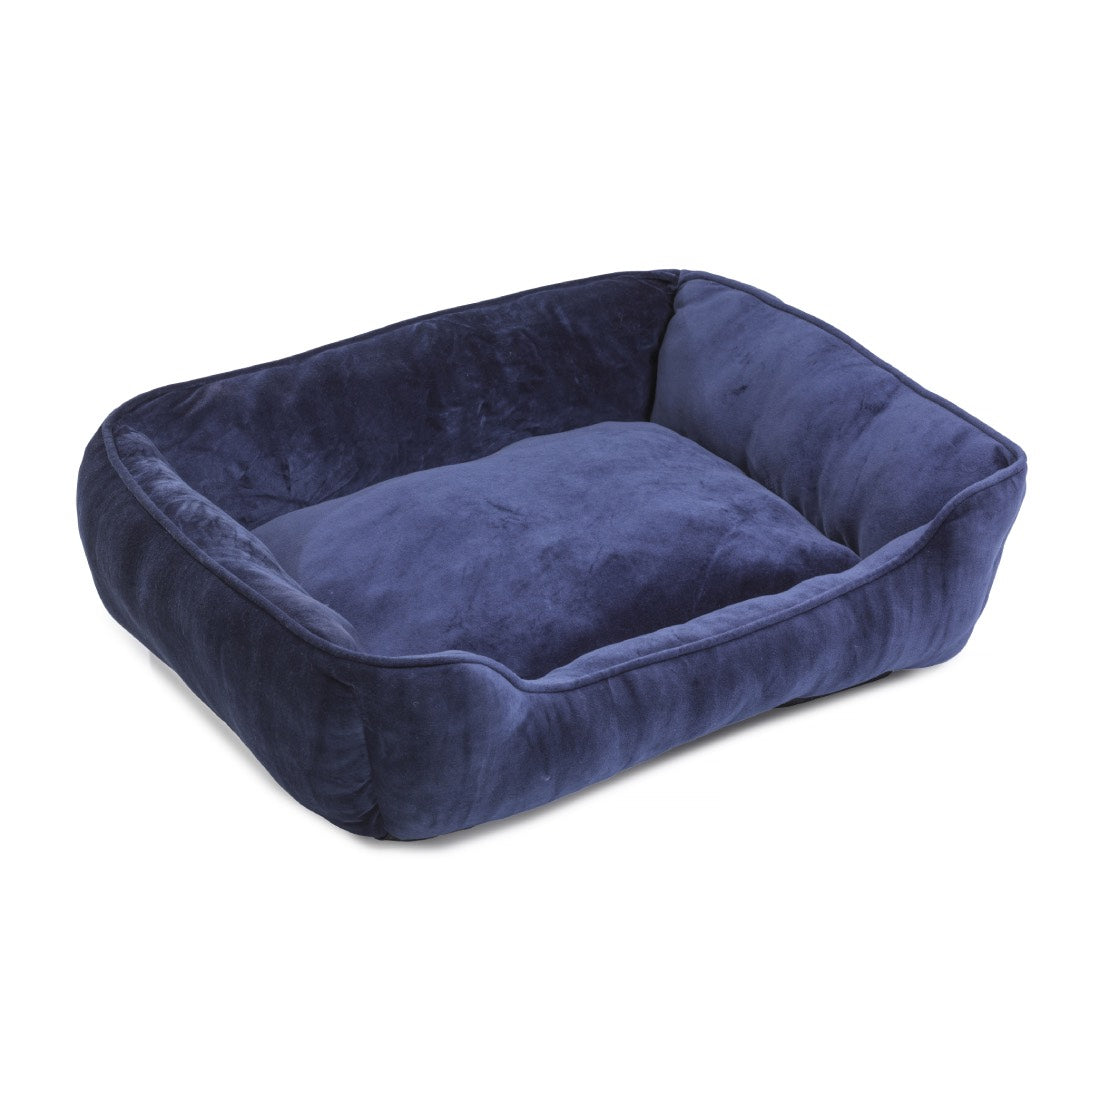 Navy Velvet Square Dog Bed by House of Paws